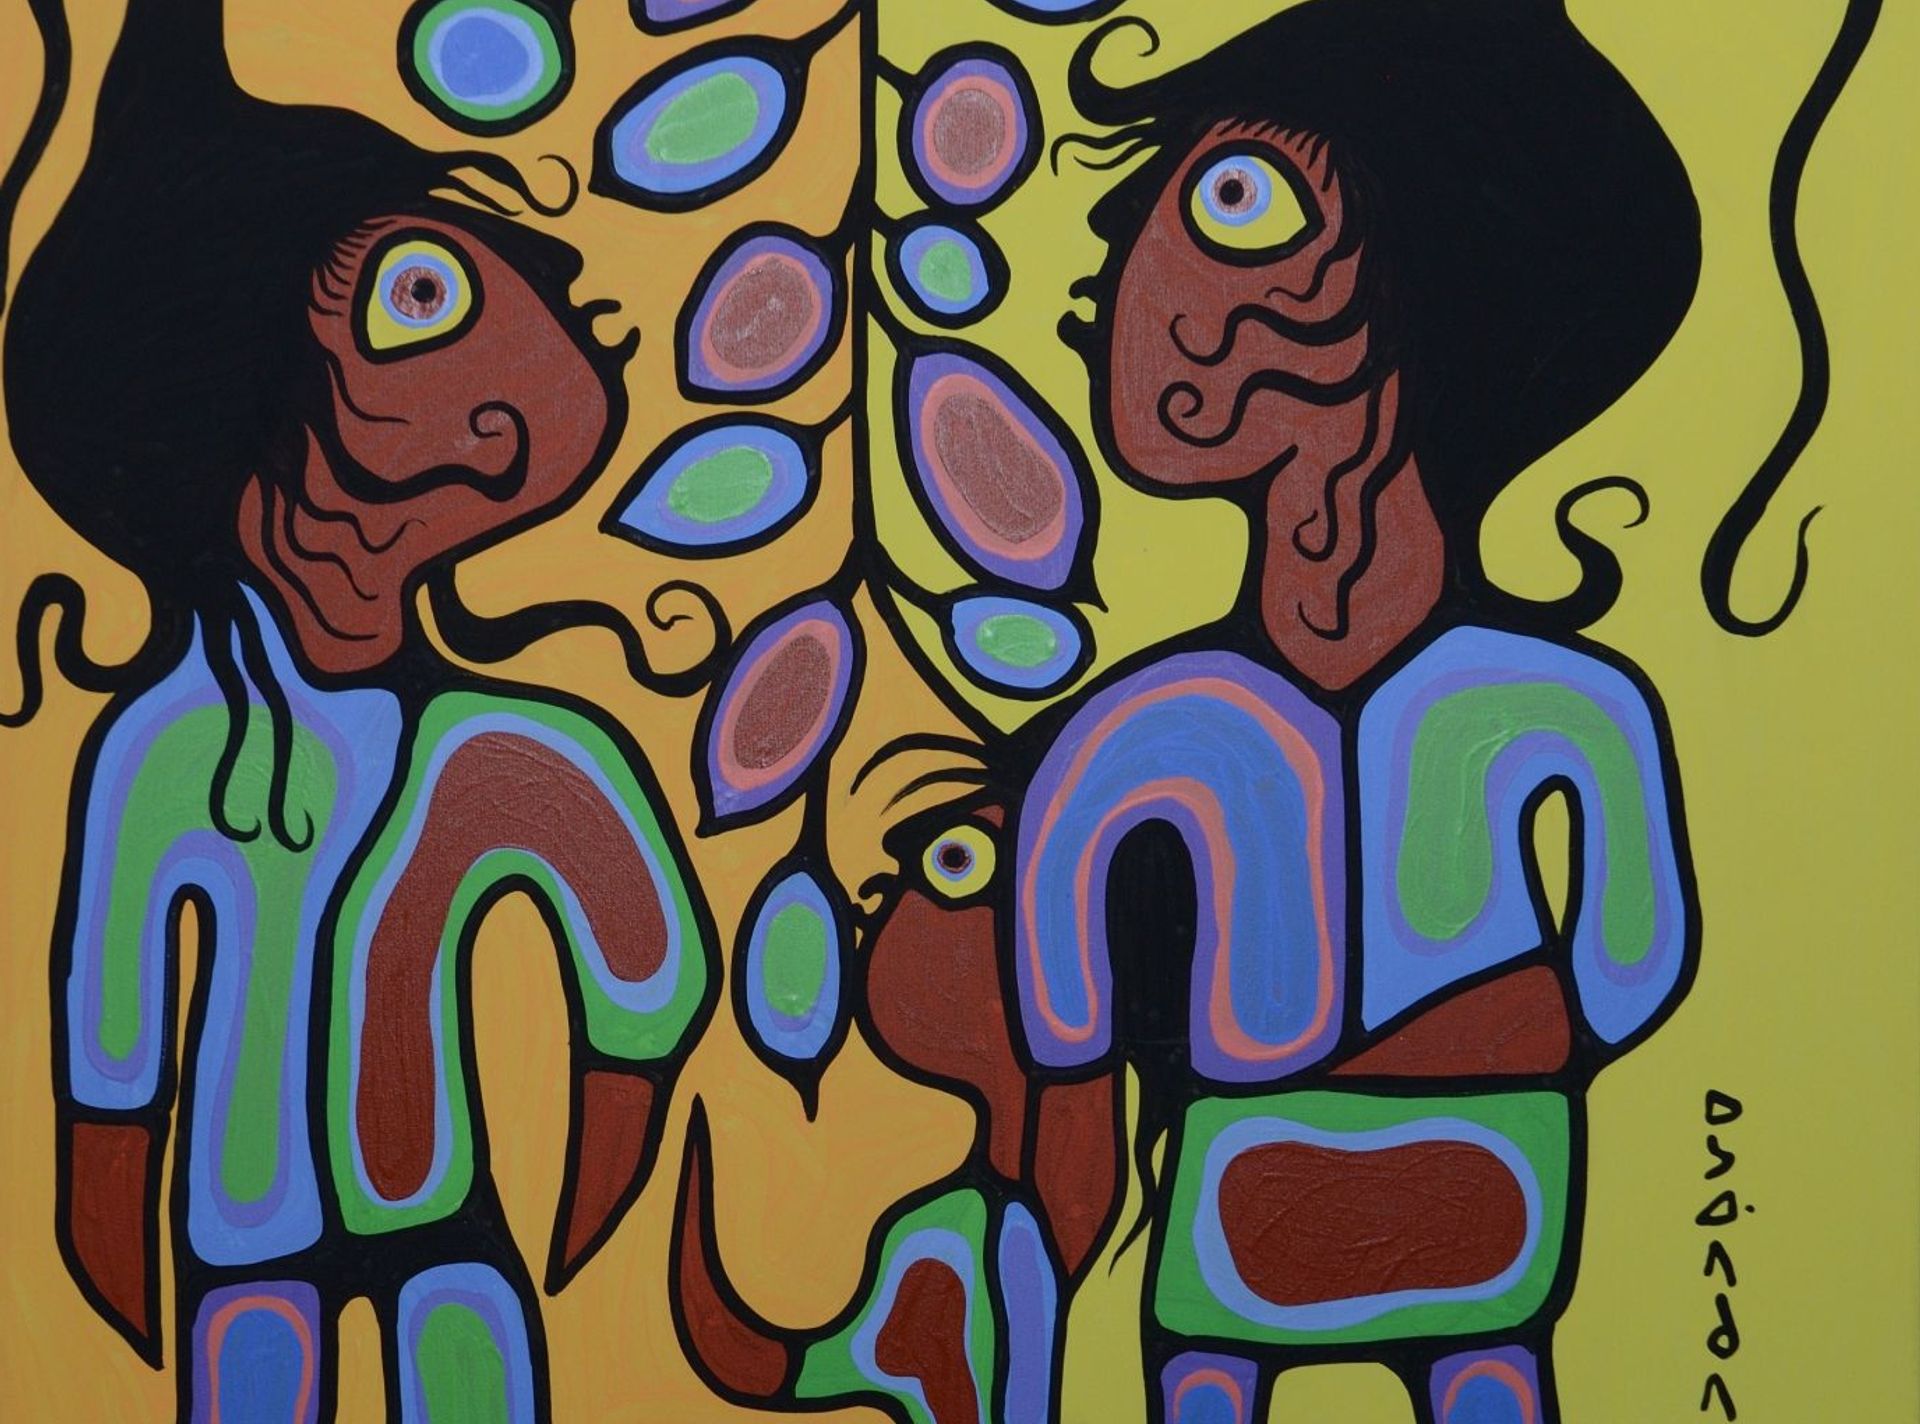 One of the alleged fraudulent artworks—purported to be painted by Norval Morrisseau—seized by Ontario police

Courtesy of Ontario Provincial Police